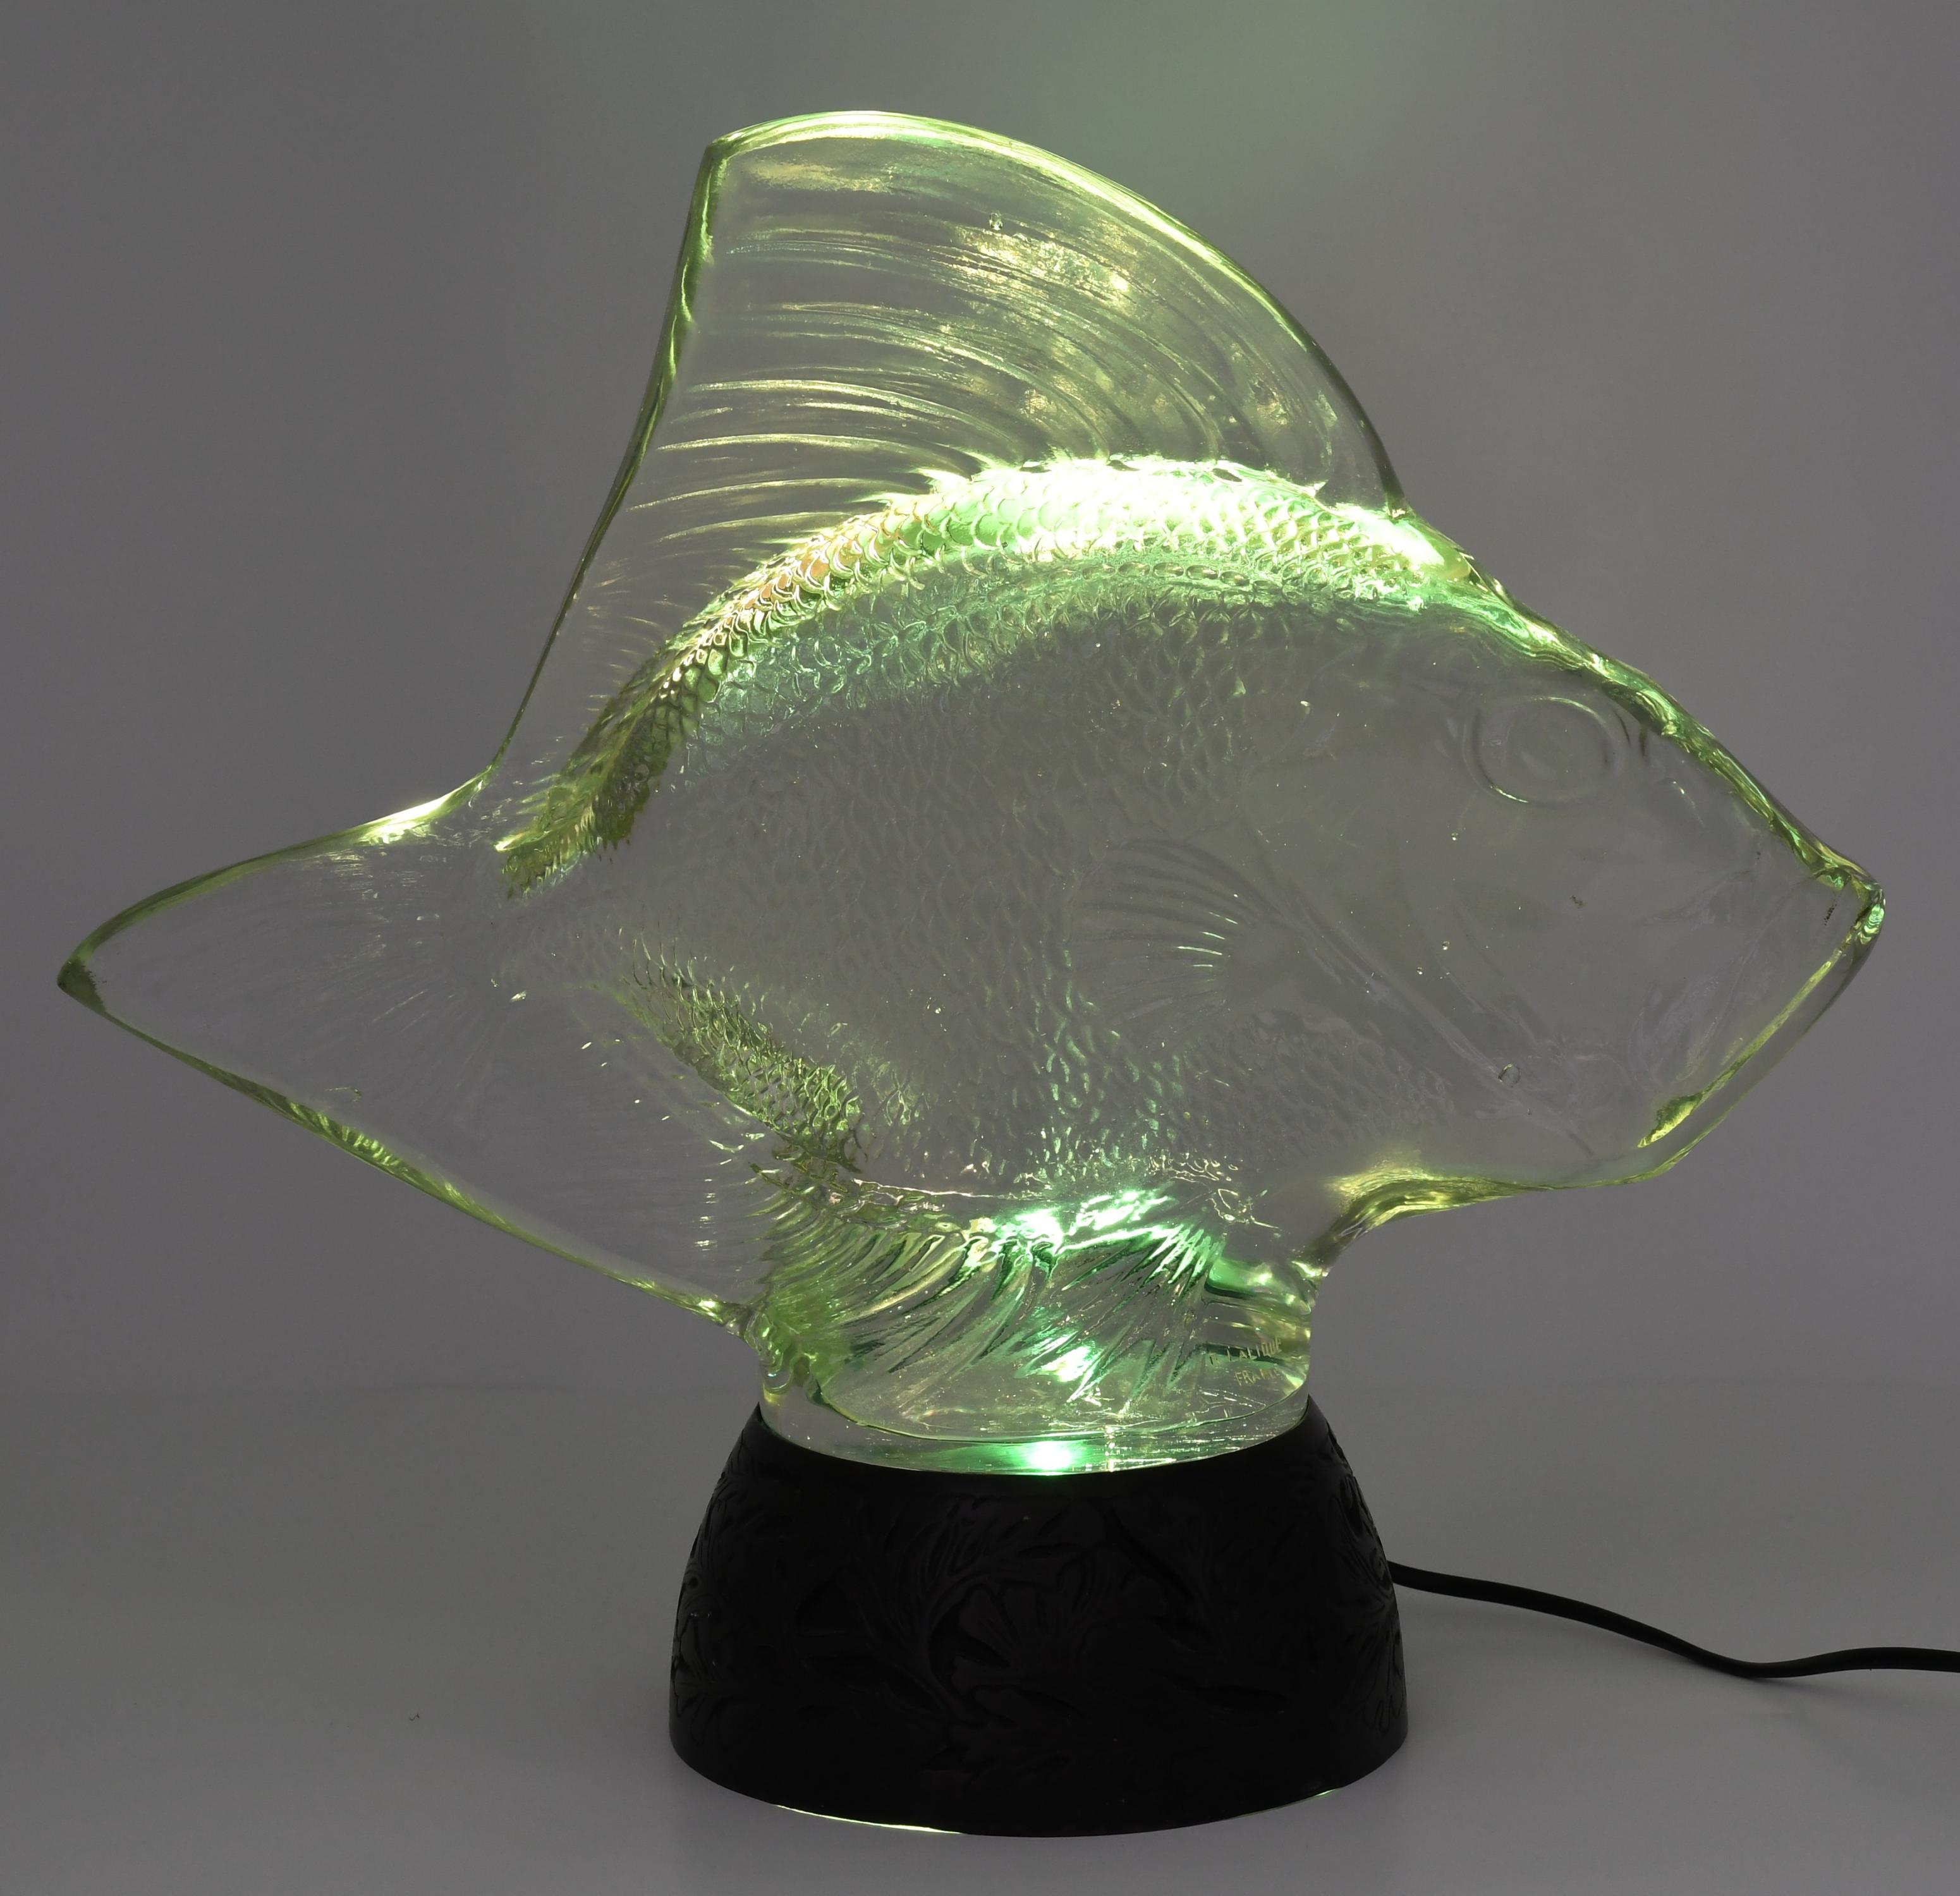 Table lamp "Gros Poisson, Vagues" - Image 6 of 6